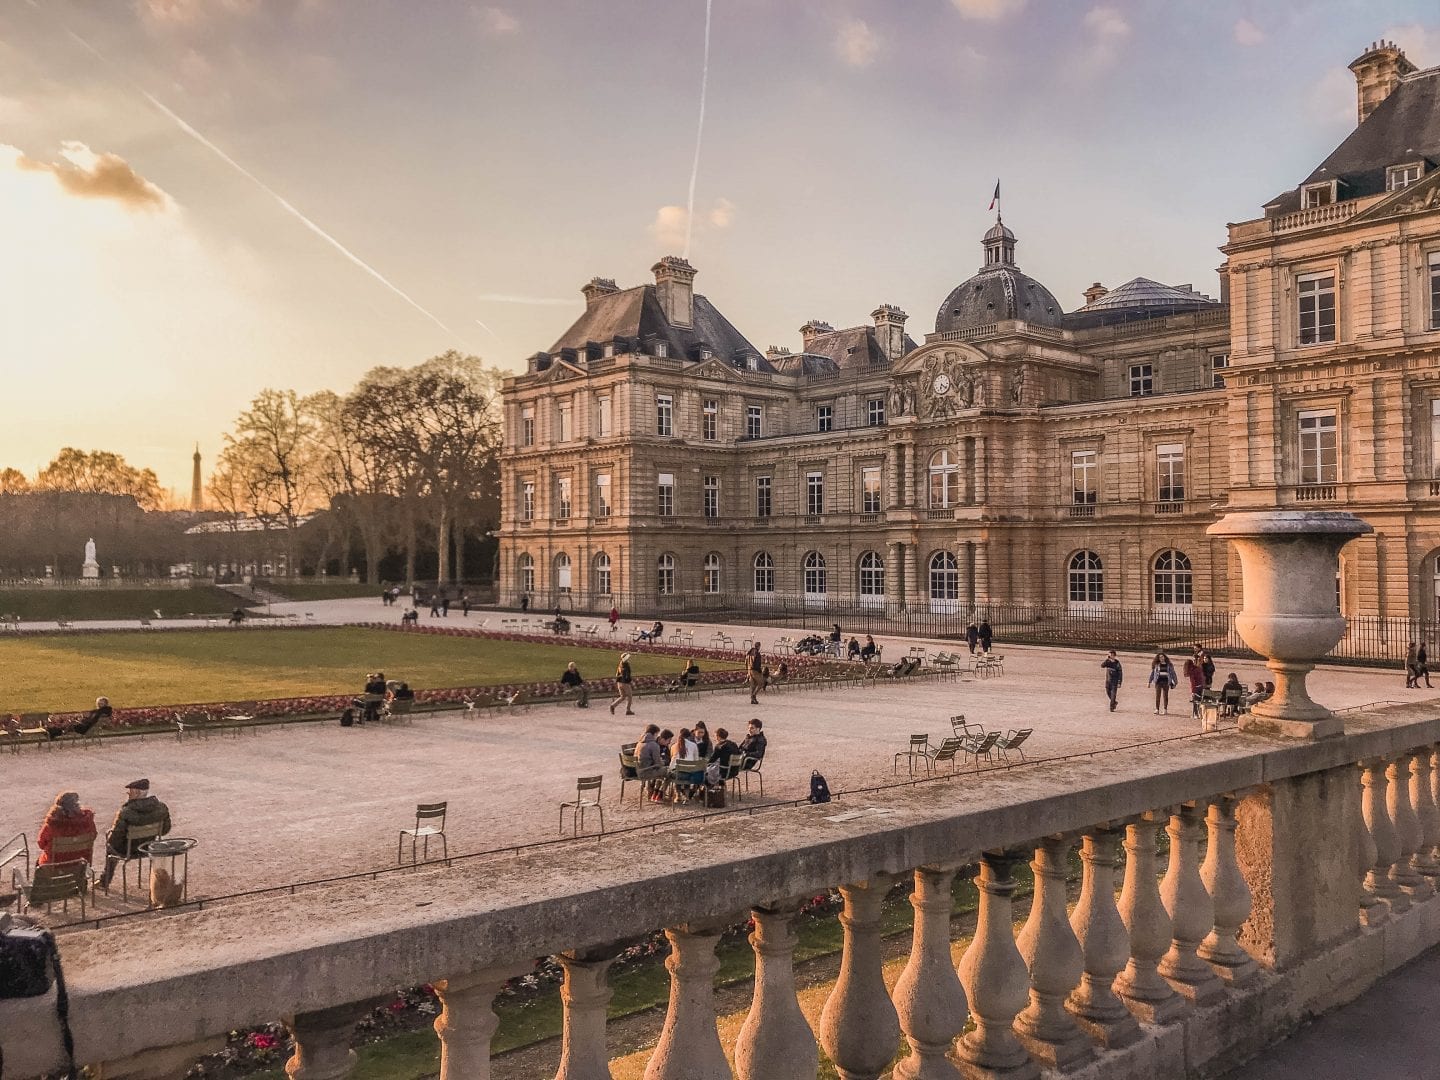 Luxembourg Palace and Gardens in Paris, France